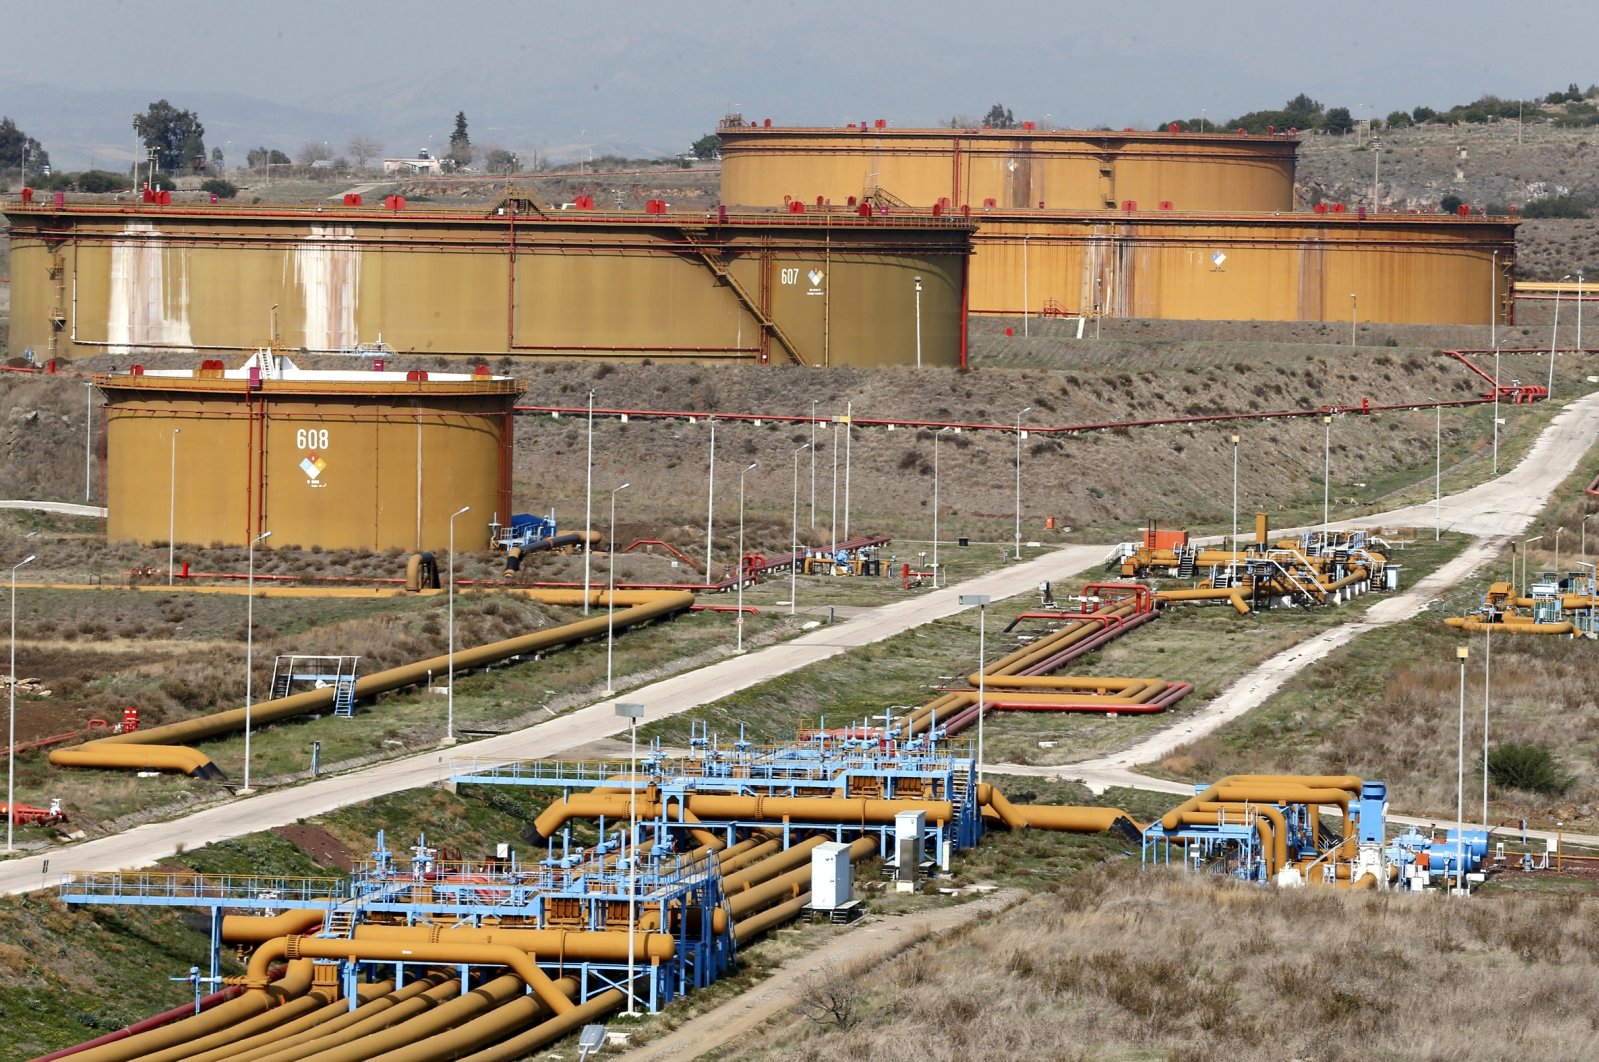 A general view of oil tanks at the port of Ceyhan, run by state-owned Petroleum Pipeline Corporation (BOTAŞ), some 70 km (43.5 miles) from Adana, southern Türkiye, Feb. 19, 2014. (Reuters Photo)